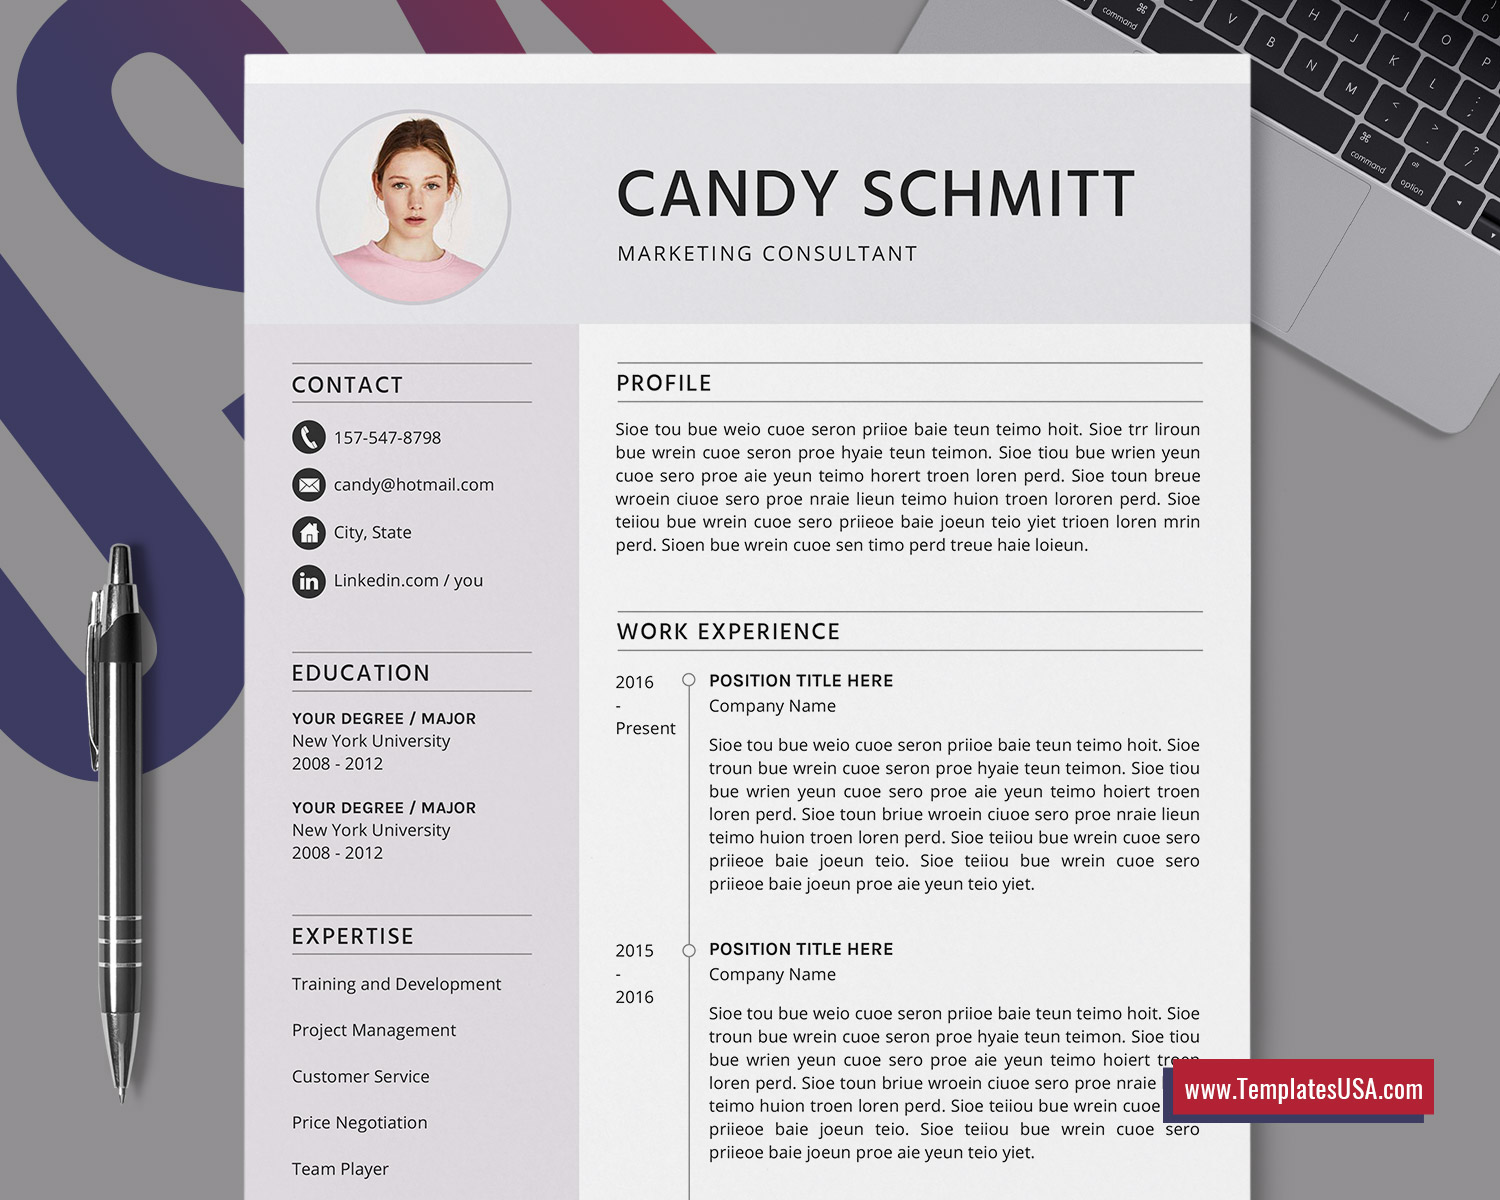 Modern Resume Template Creative Cv Template Professional Cv Format Ms Word Resume 1 2 And 3 Page Resume Design Top Selling Resume Template For Job Application Instant Download Templatesusa Com